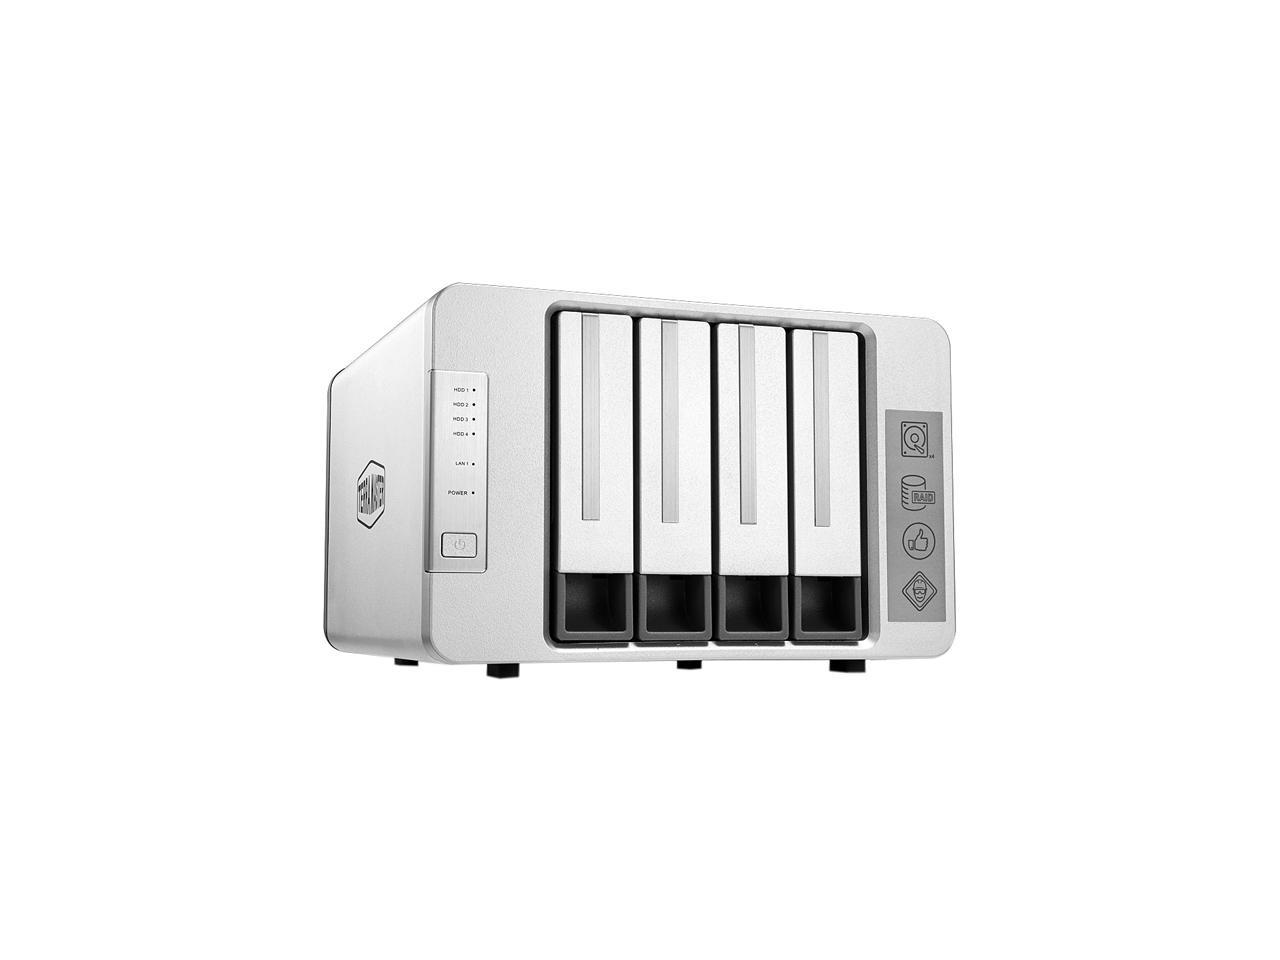 TerraMaster F4-210 4-Bay NAS 1GB RAM Quad Core Network Attached Storage (Diskless) $169 + $10 GC + Free Shipping